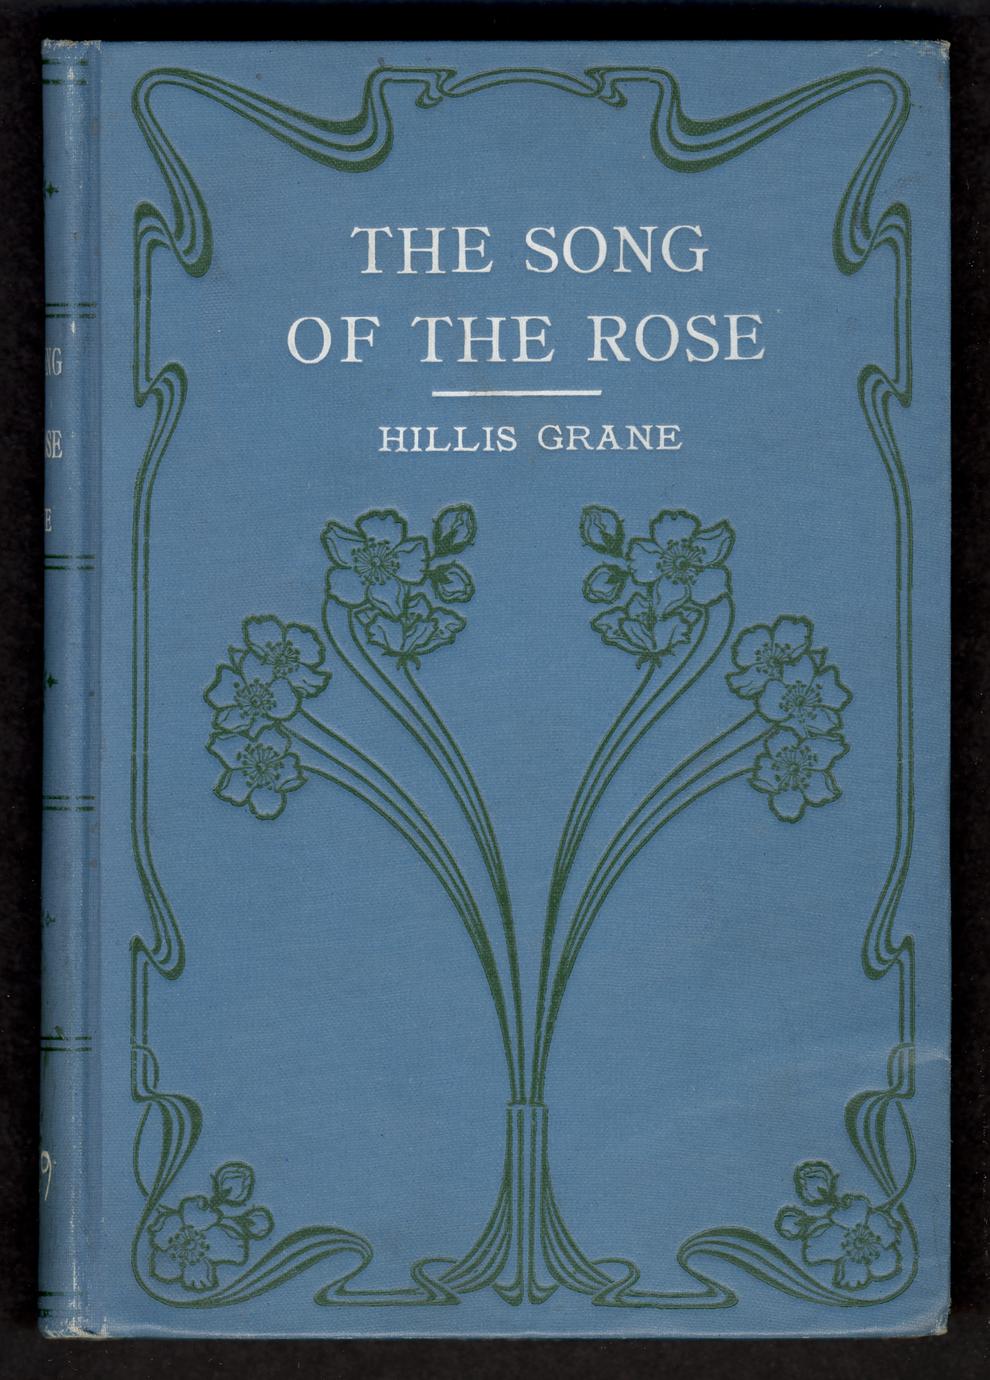 The song of the rose (1 of 2)